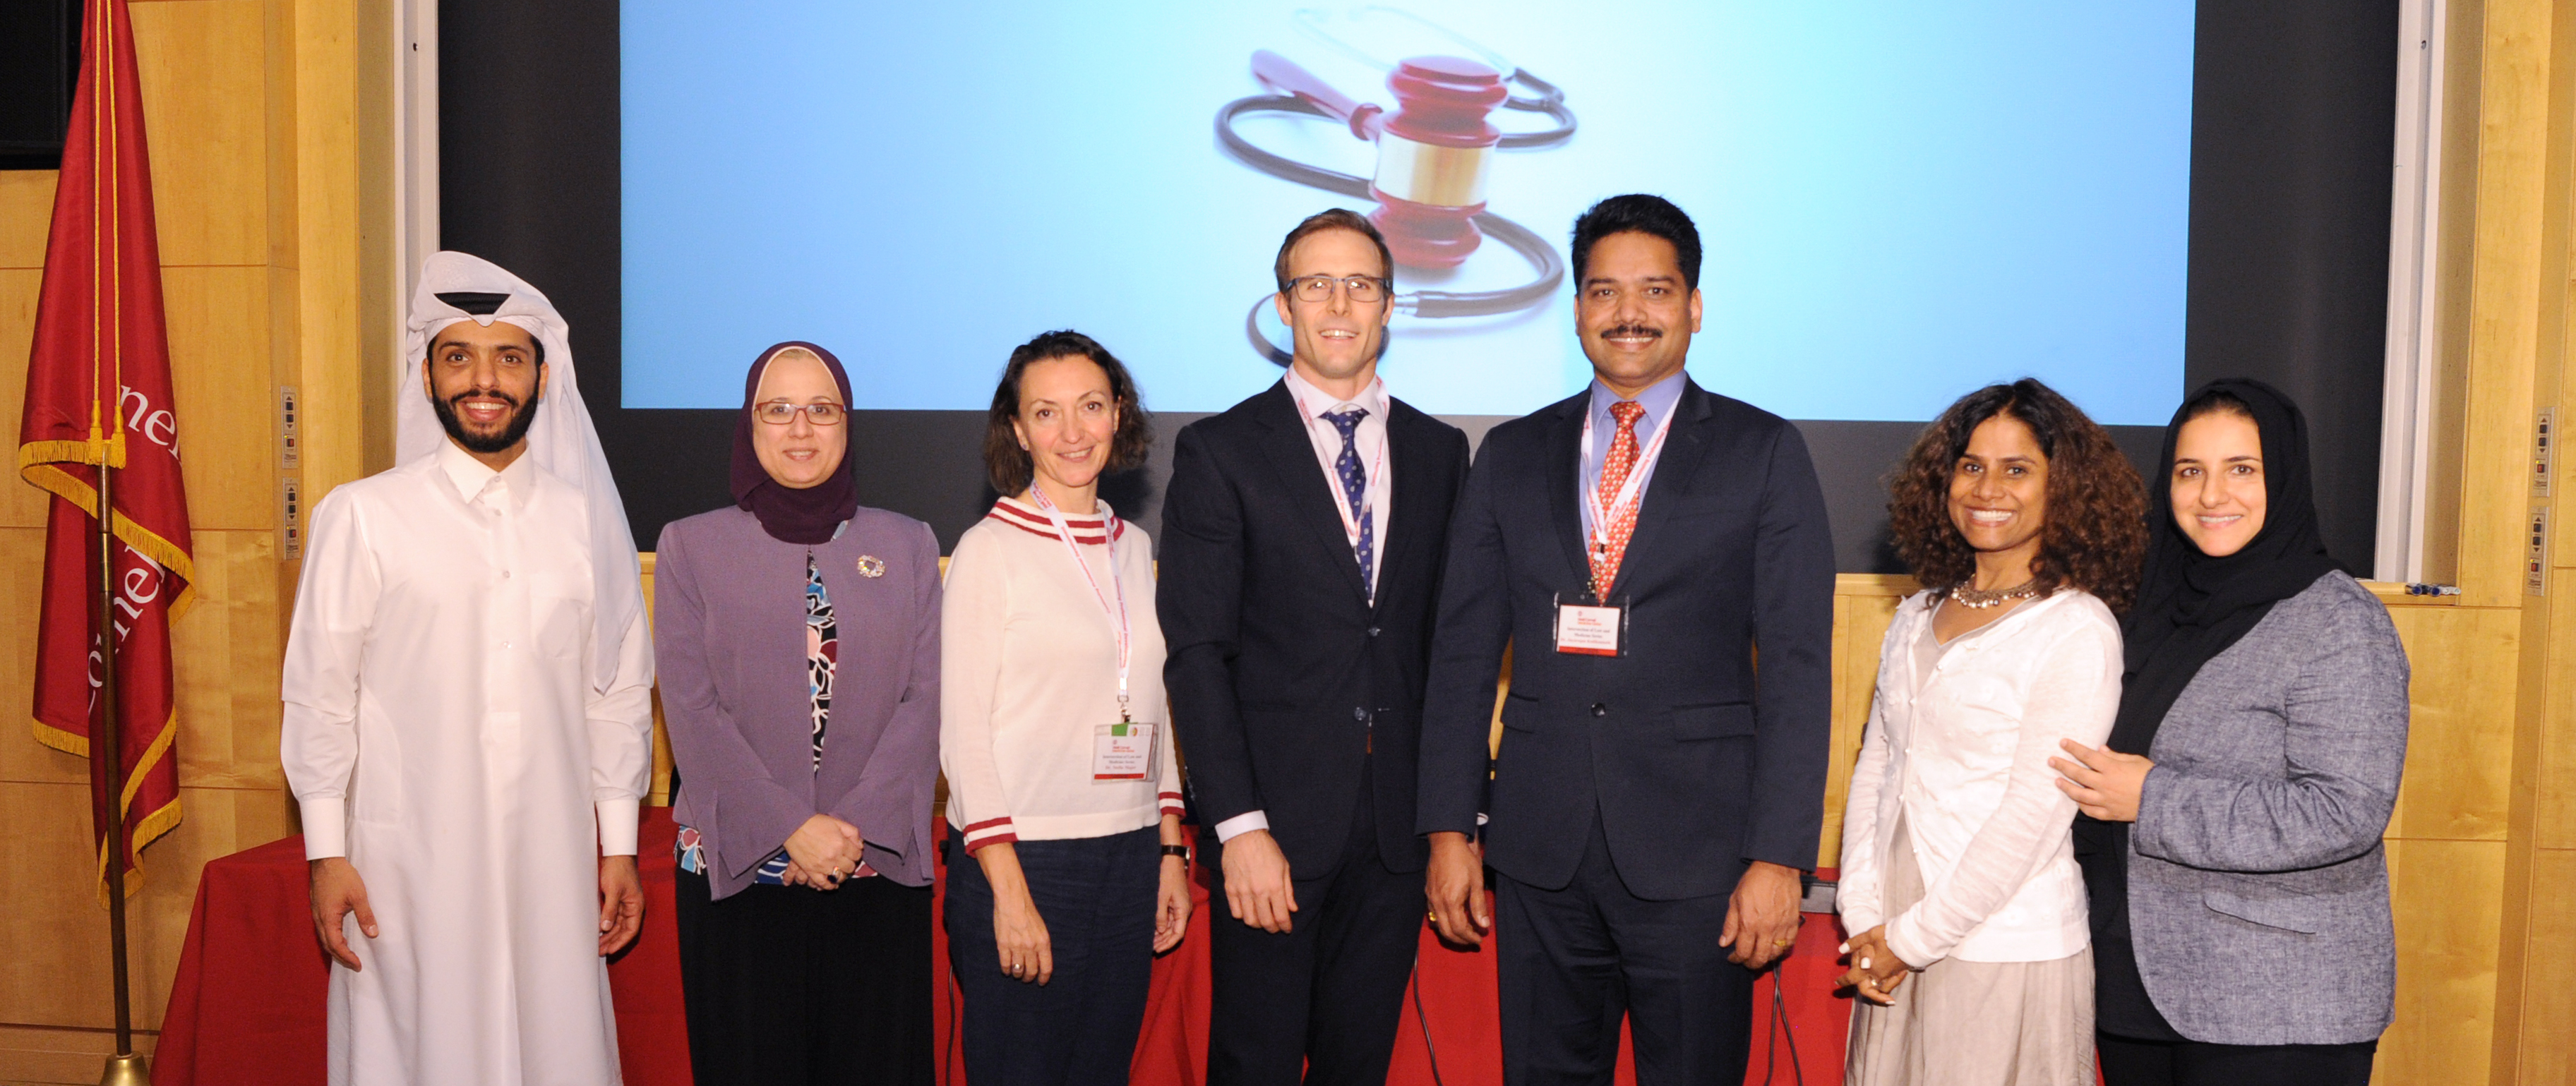 WCM-Q explores regulation of complementary and alternative medicine in Qatar